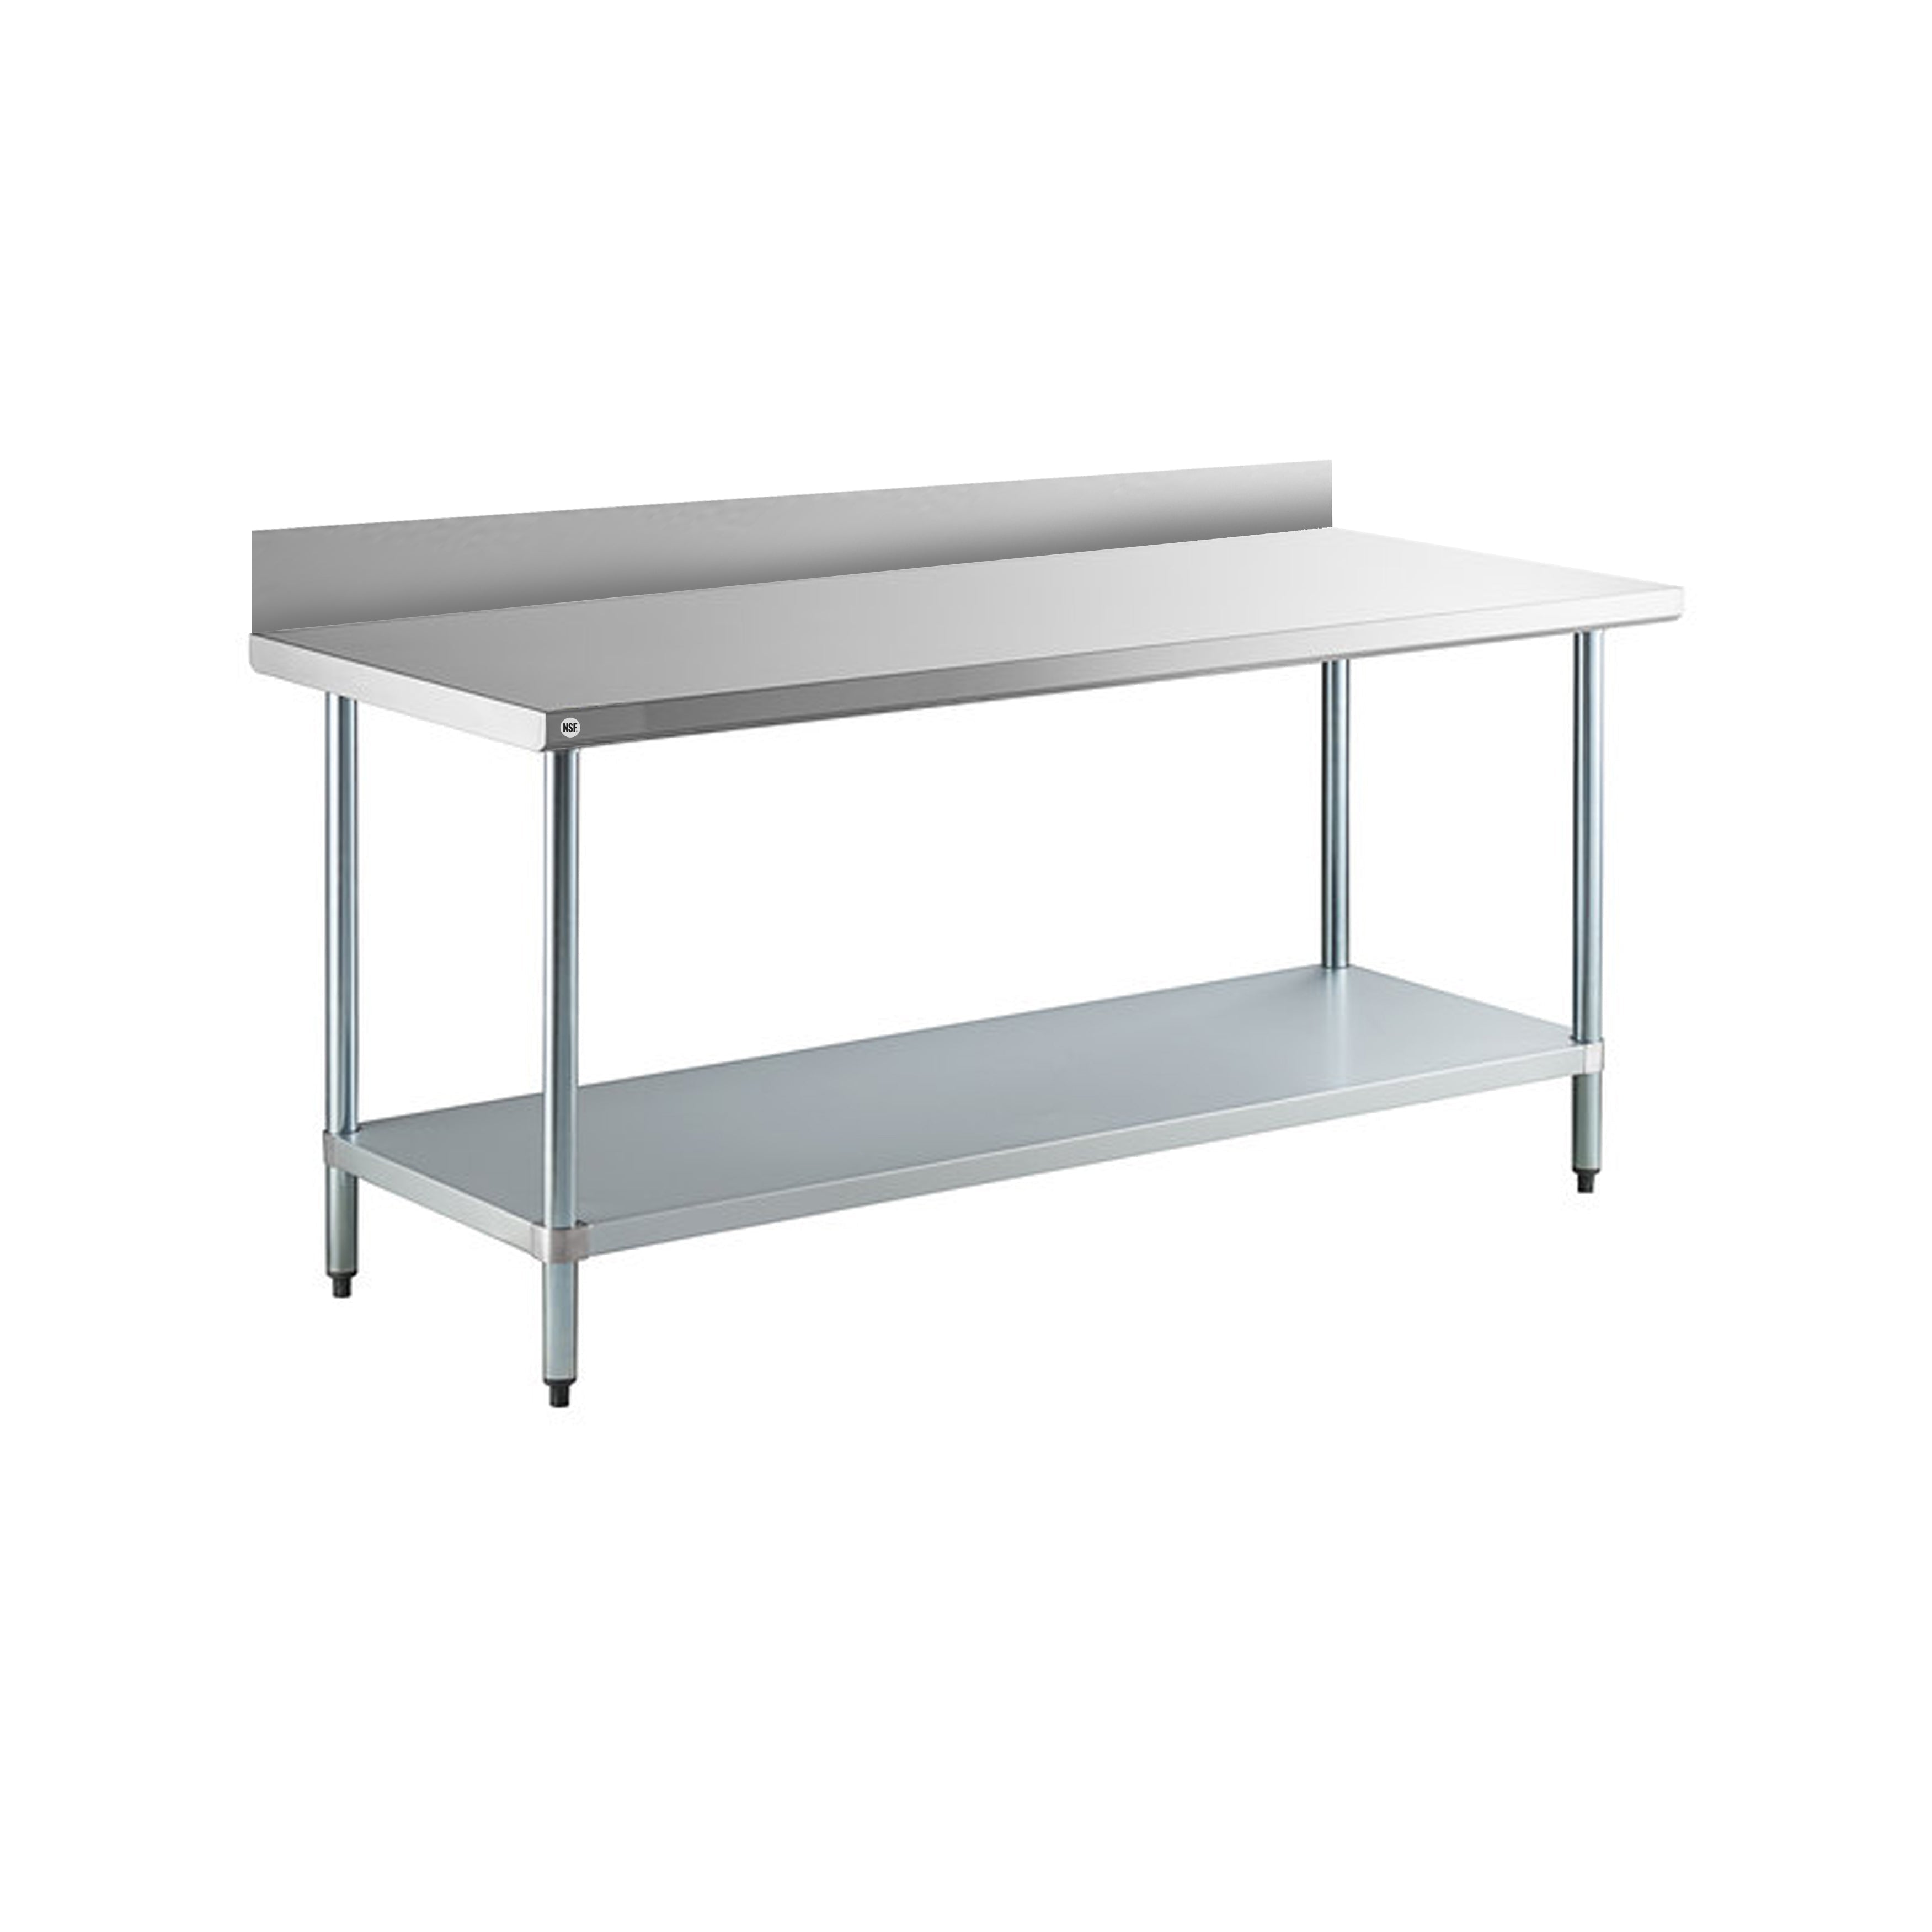 Omcan - 23803, Commercial 48" x 30" Stainless Steel Kitchen Work Table with 4" Back Splash 1100lbs Medium Duty